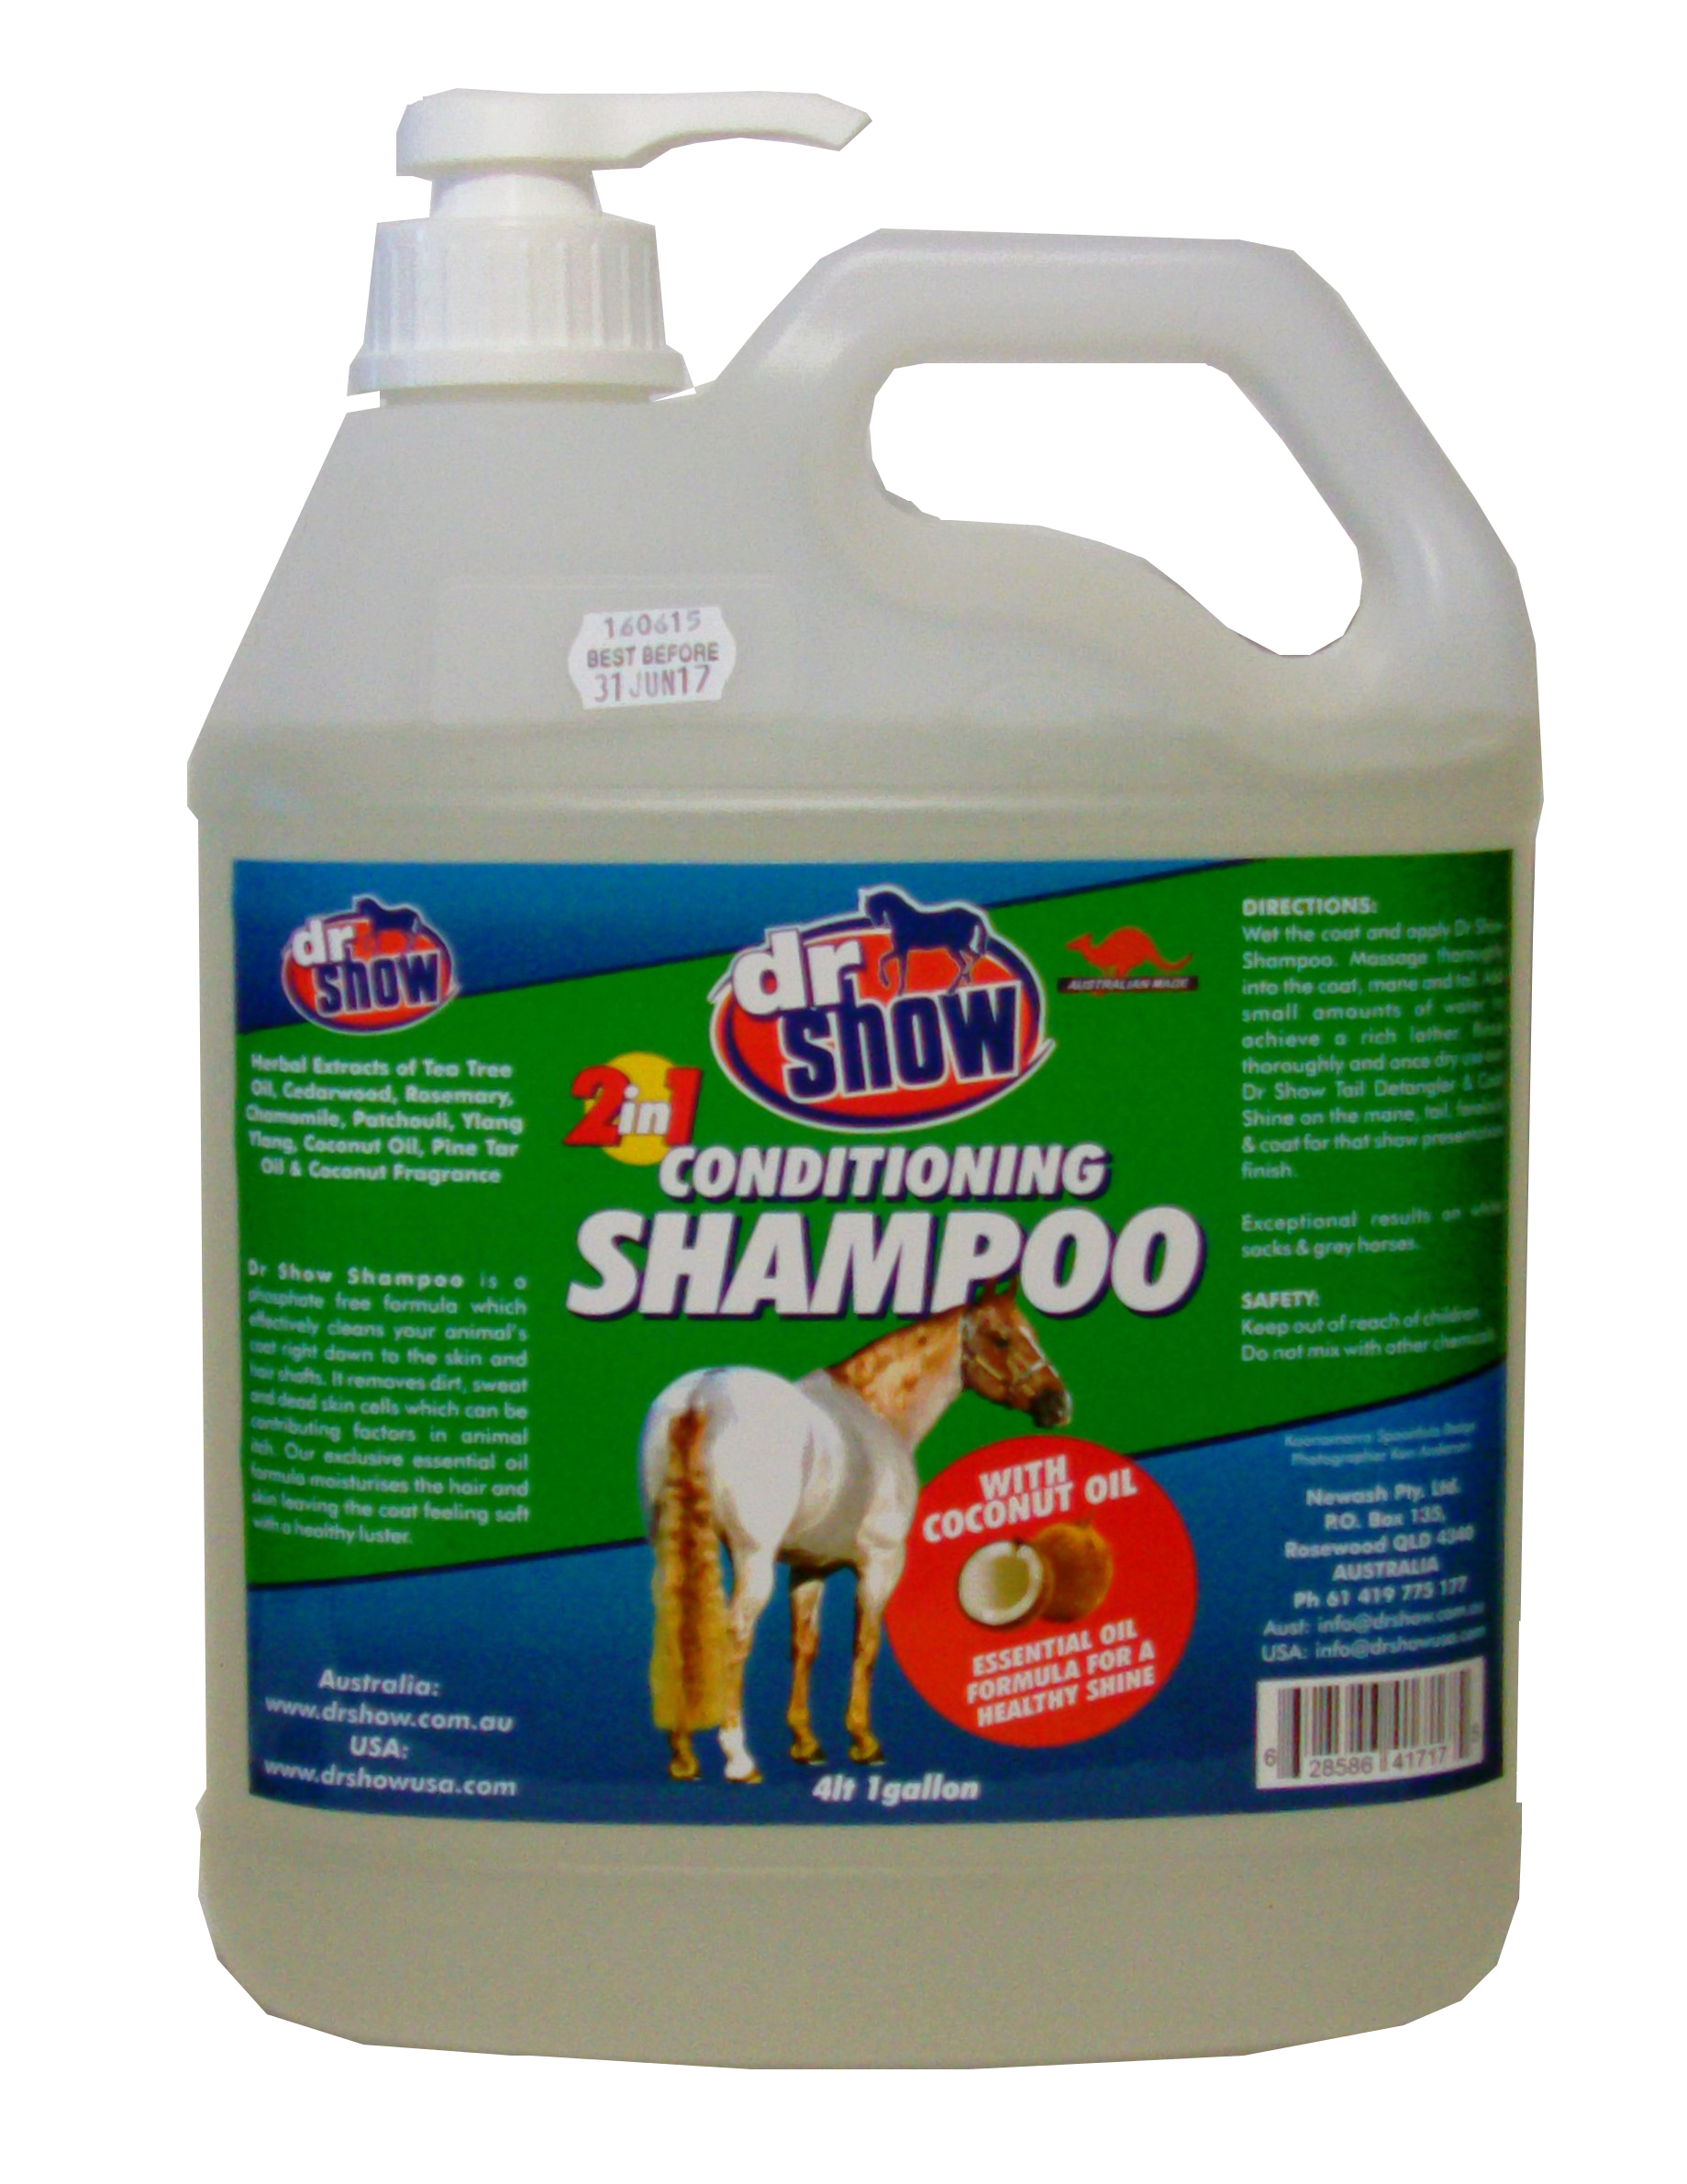 Horse Shampoo All in One Conditioning Shampoo